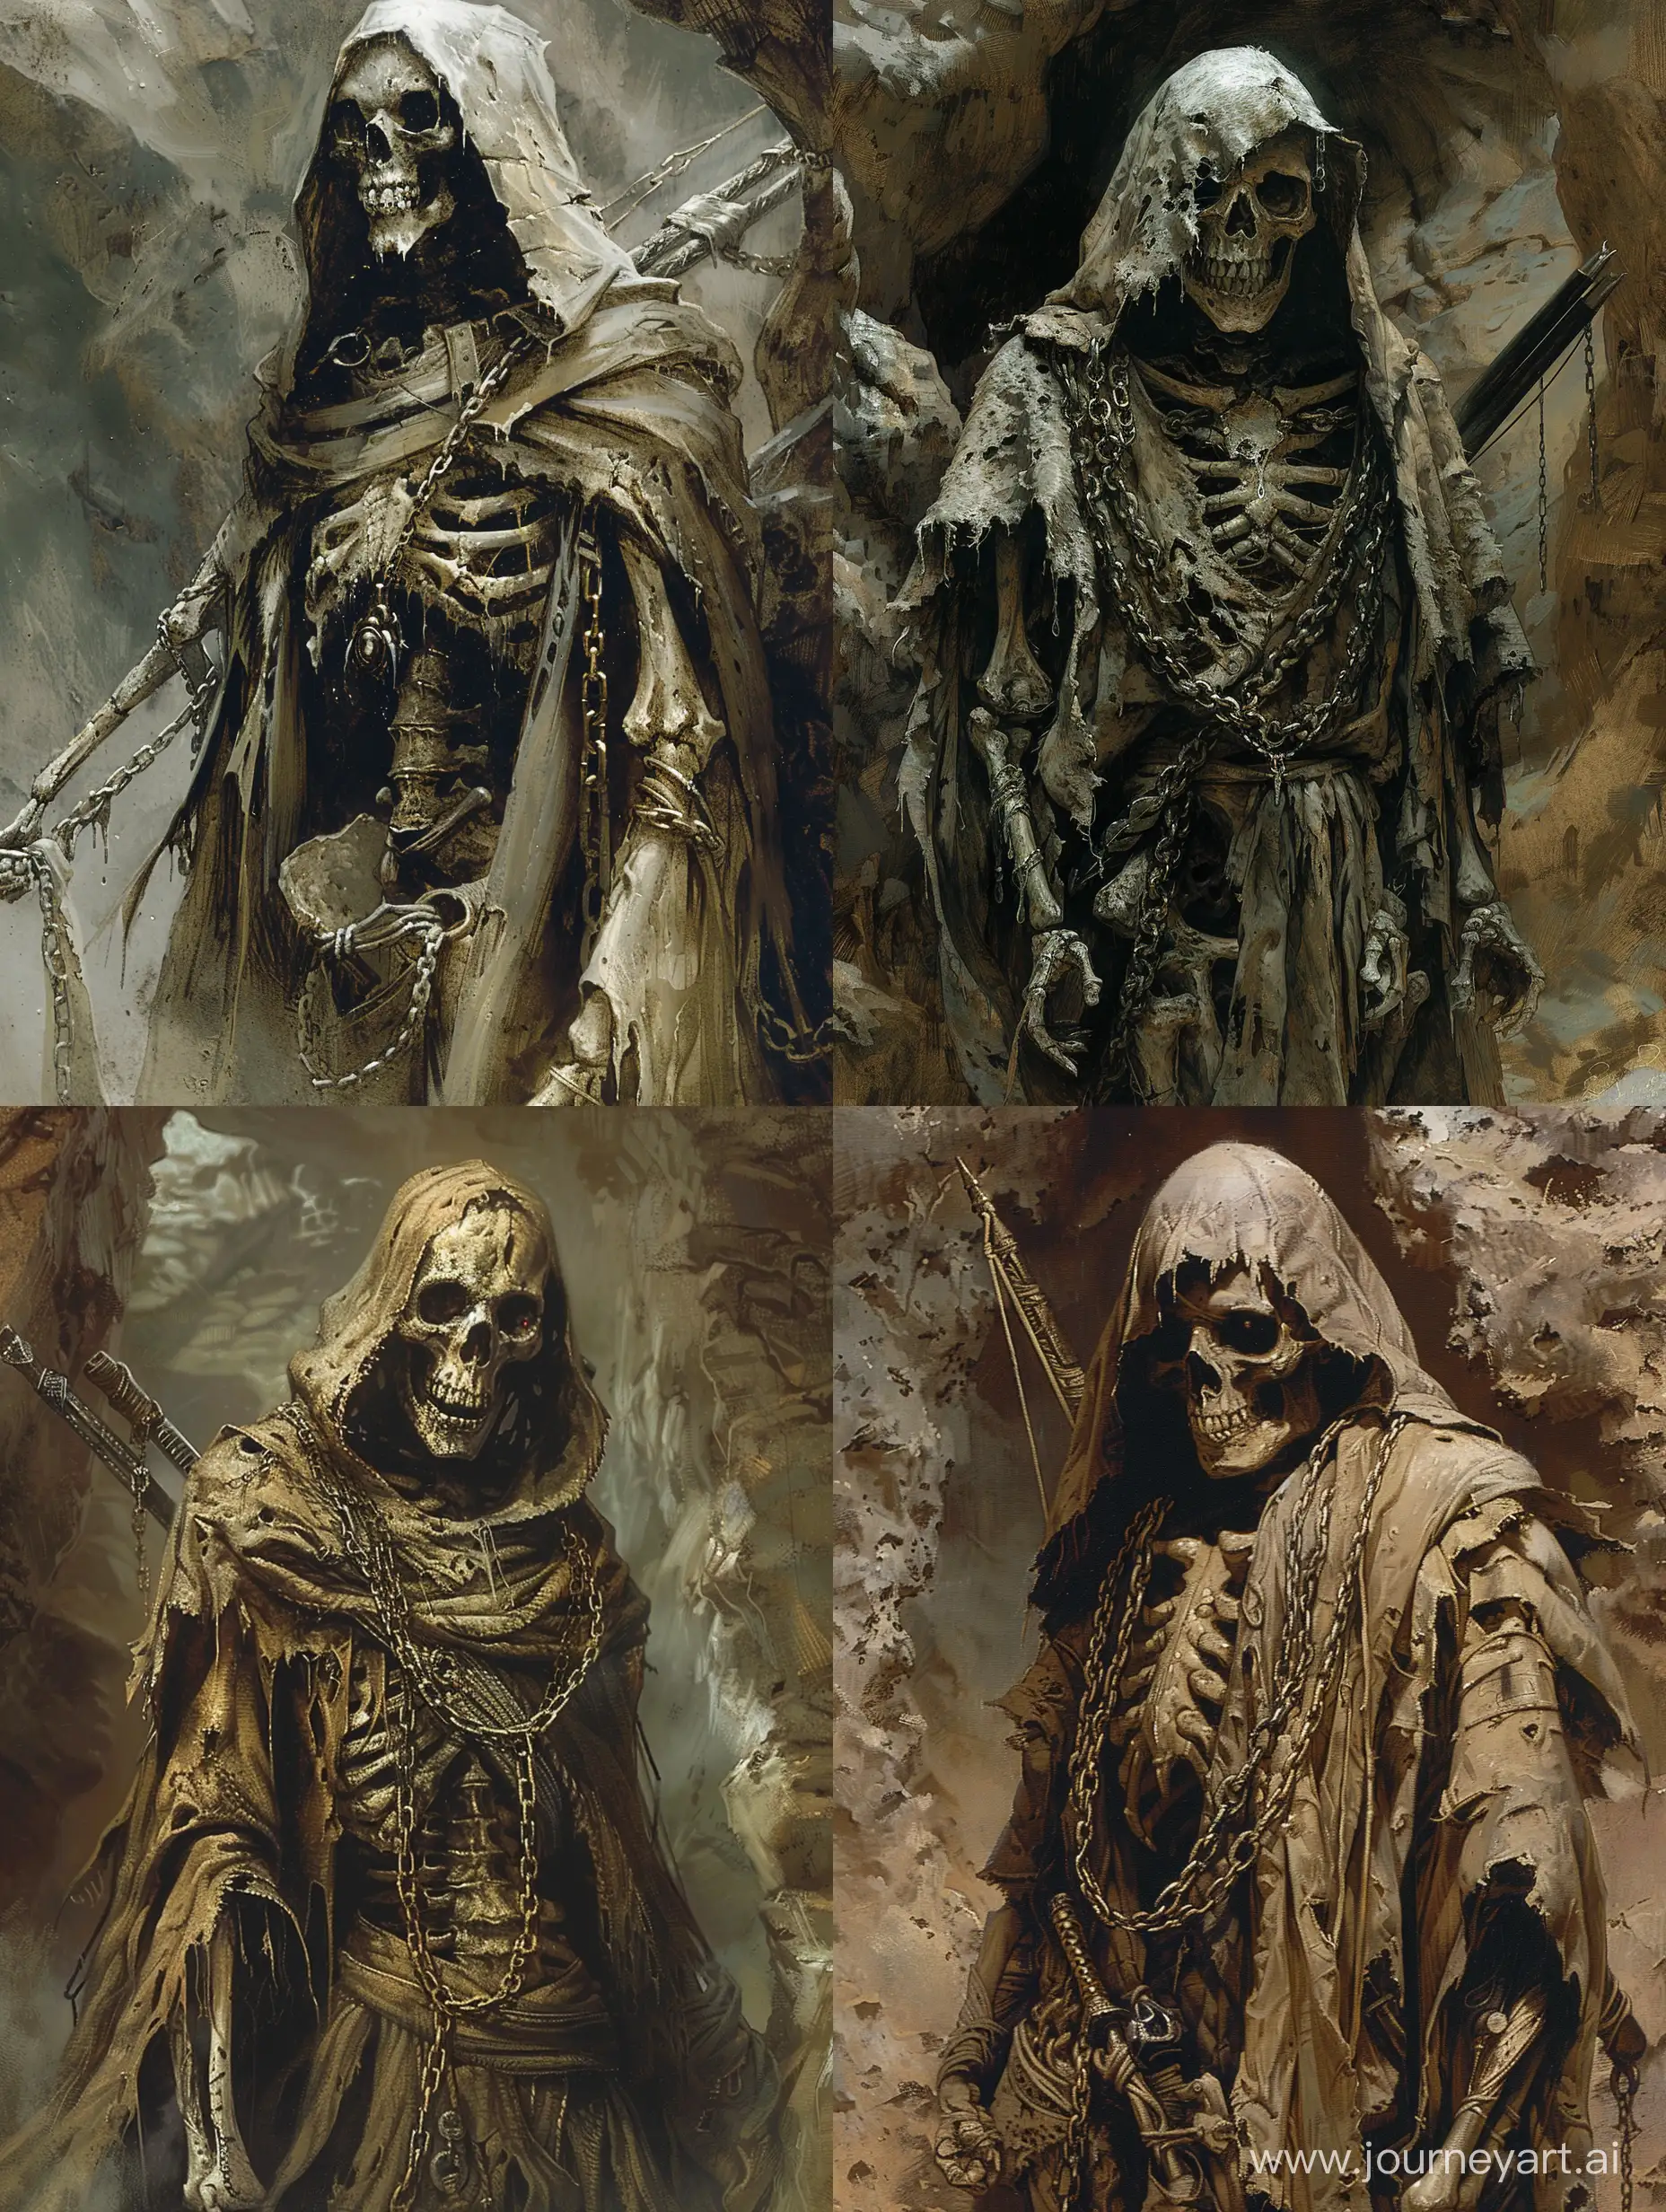 Skeleton warrior [ The central subject is a skeletal being draped in tattered robes and armor. The figure wears a hooded cloak, obscuring most of its skull-like face. Only the empty eye sockets and an open mouth are visible. The robes are worn and torn, suggesting age or neglect. Chains are wrapped around its body, adding to the eerie ambiance. The background is rendered in muted tones, enhancing the overall sense of foreboding. The figure stands against this backdrop, exuding an aura of ancient malevolence]with robe and hood,naginata on the back , in a cave-like place underground , horror place , incredible detail,terrifying,Imaginary image,fantasy.